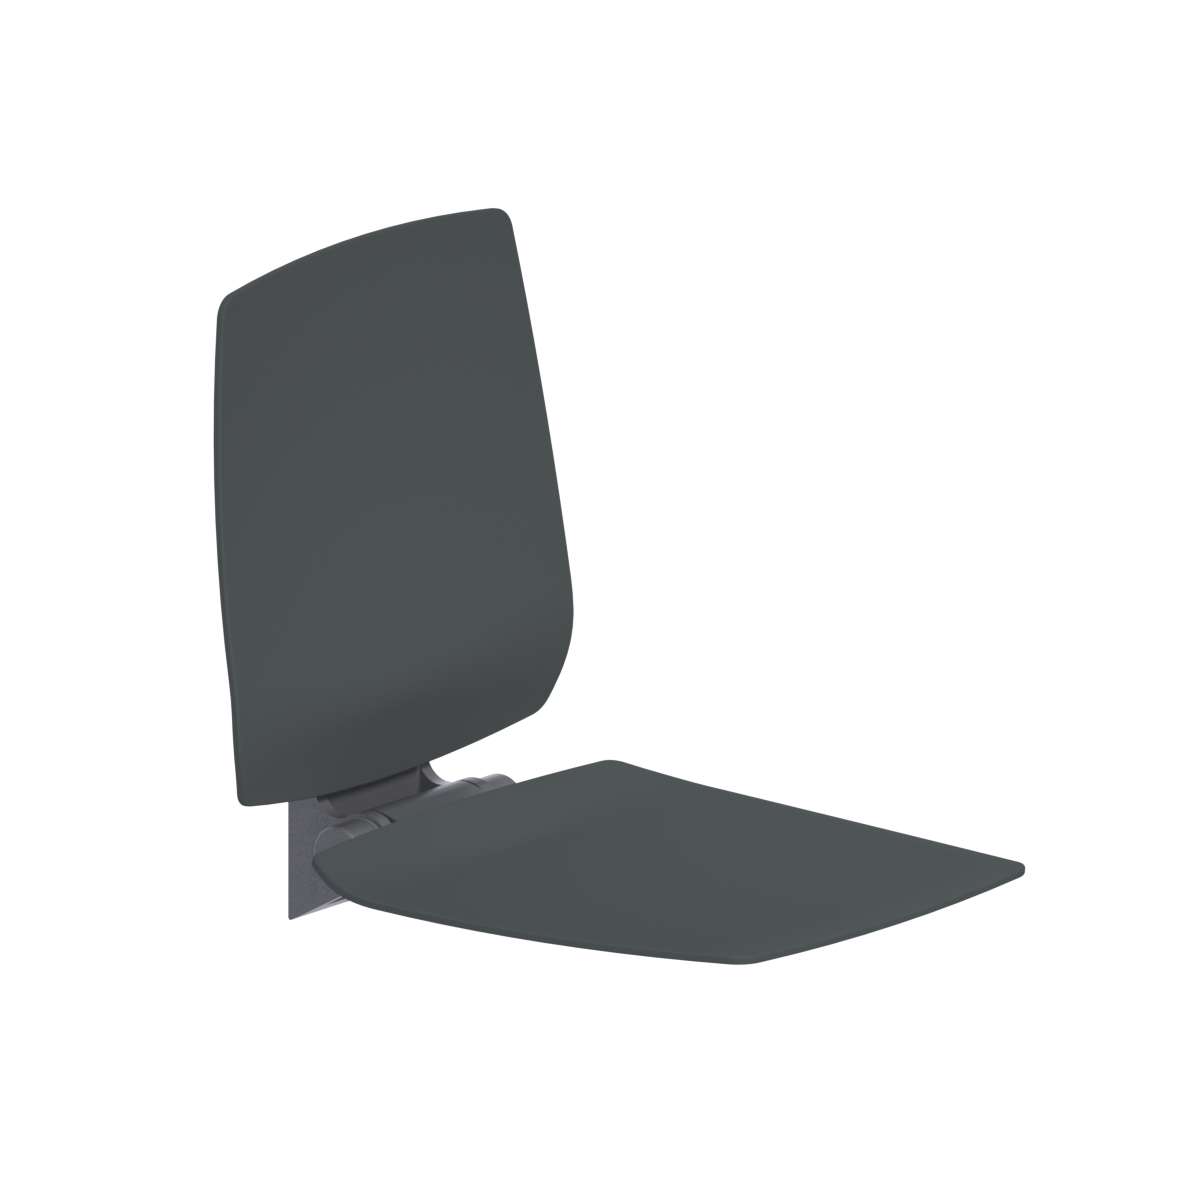 Ascento Lift-up shower seat vario, with Backrest, 412 x 512 x 505 mm, Ascento Dark grey